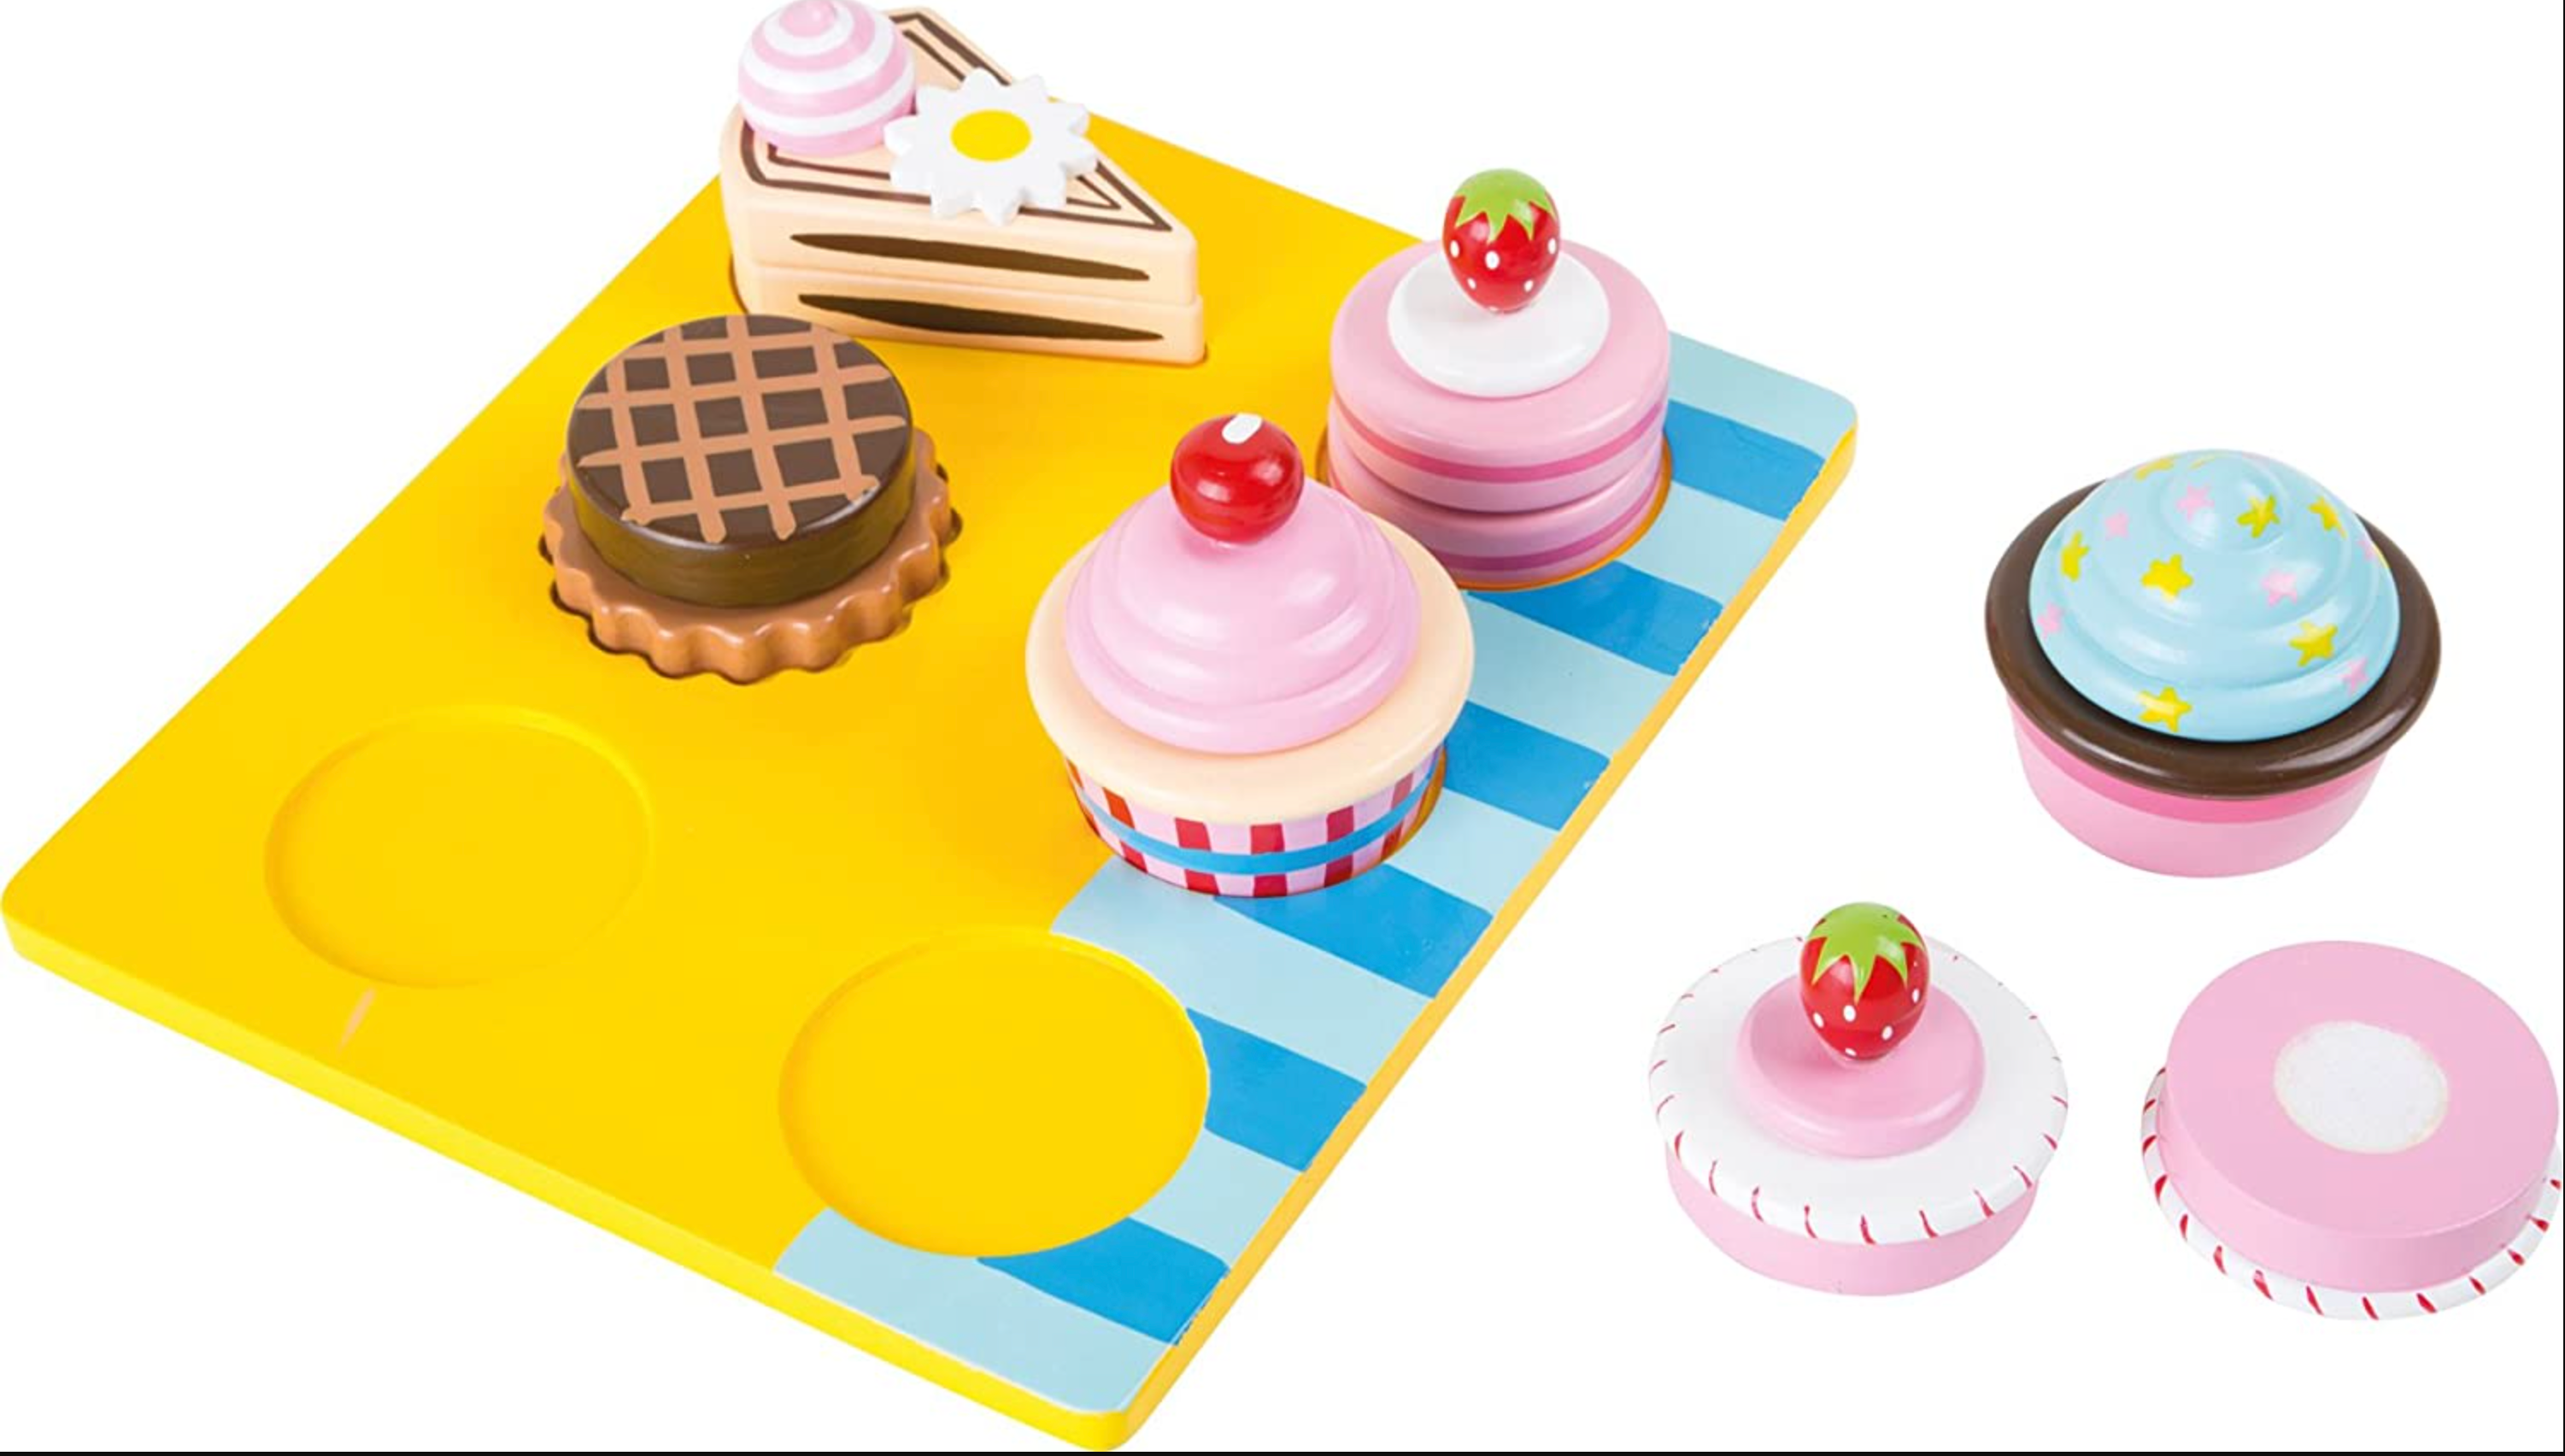 Small Foot Wooden Toys - Cupcakes and Cakes Cutting Play Set, Multi